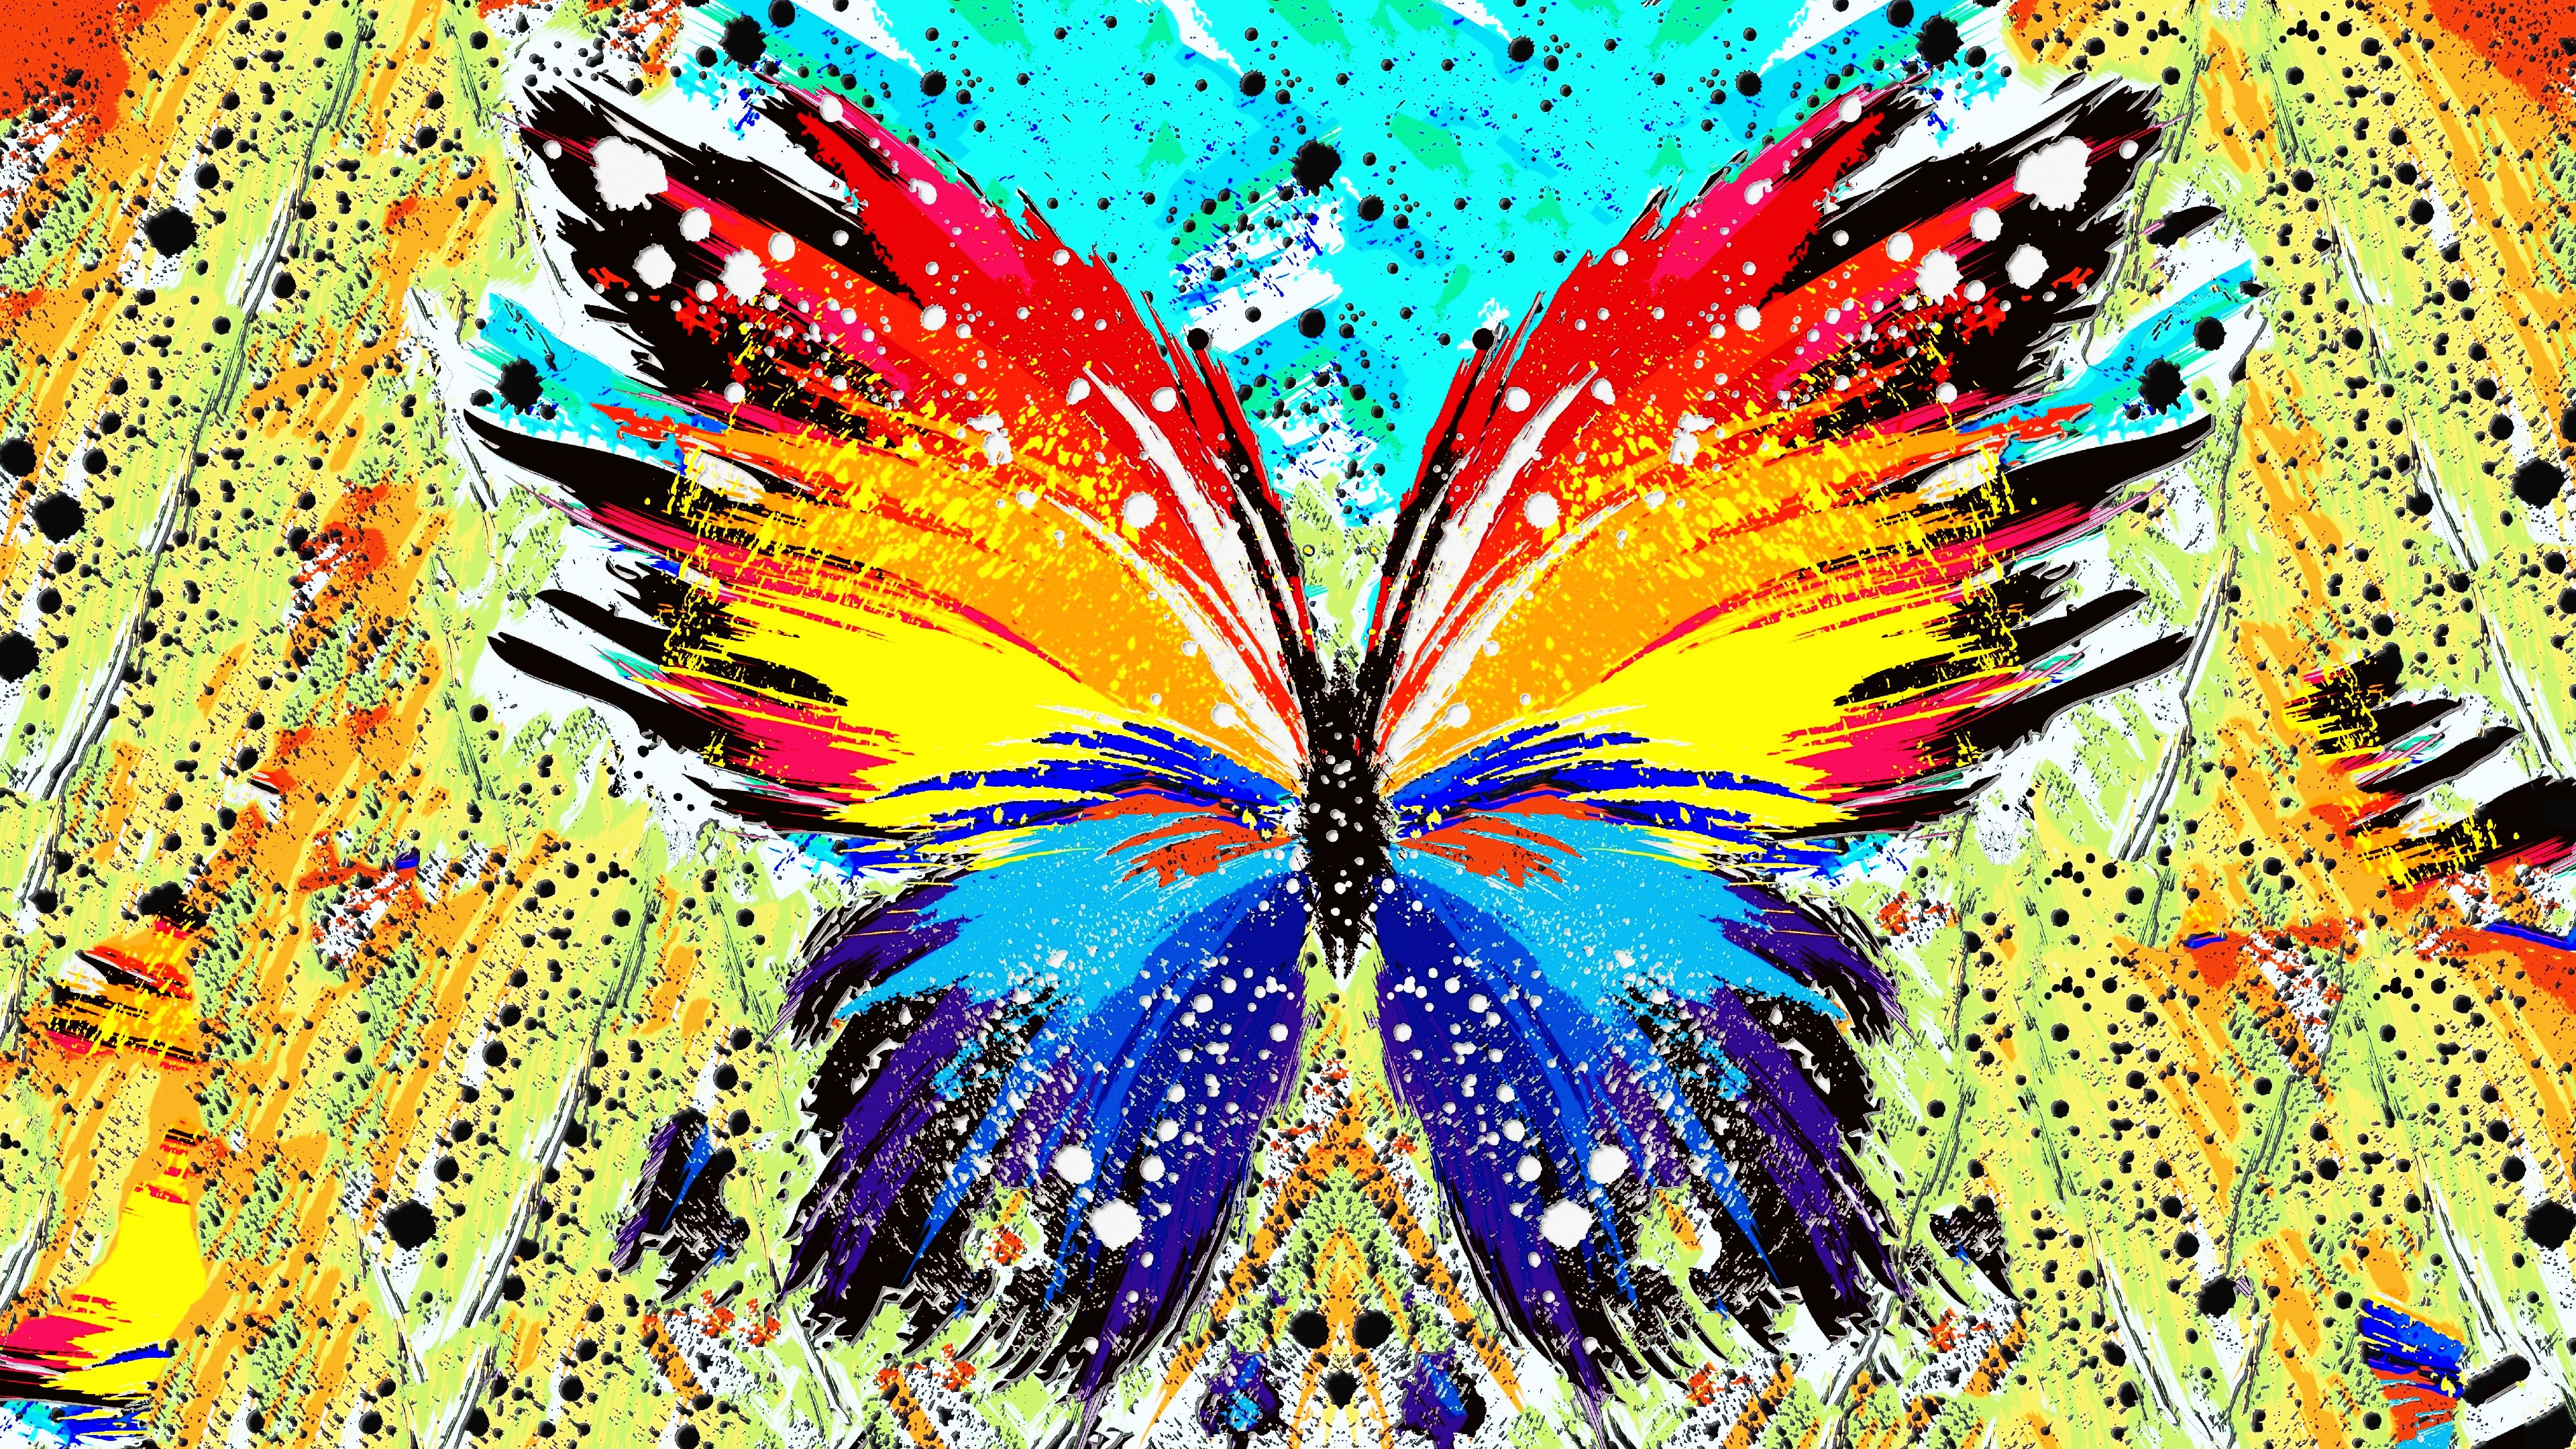 Abstract Butterfly Wallpapers